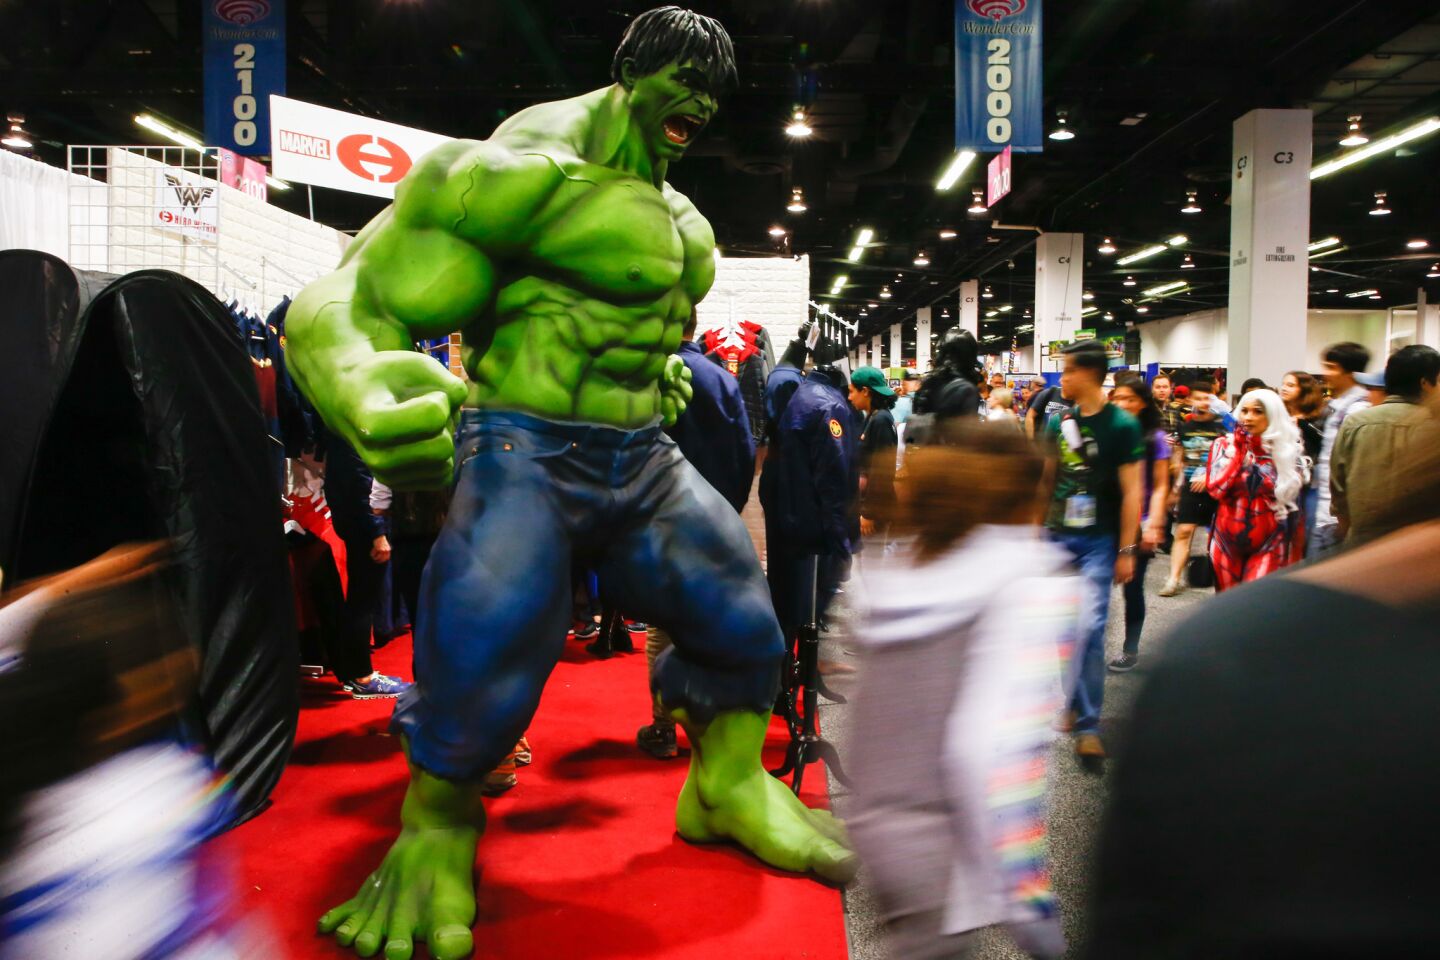 People walk past a statue of Marvel’s the Incredible Hulk at the Anaheim Convention Center.